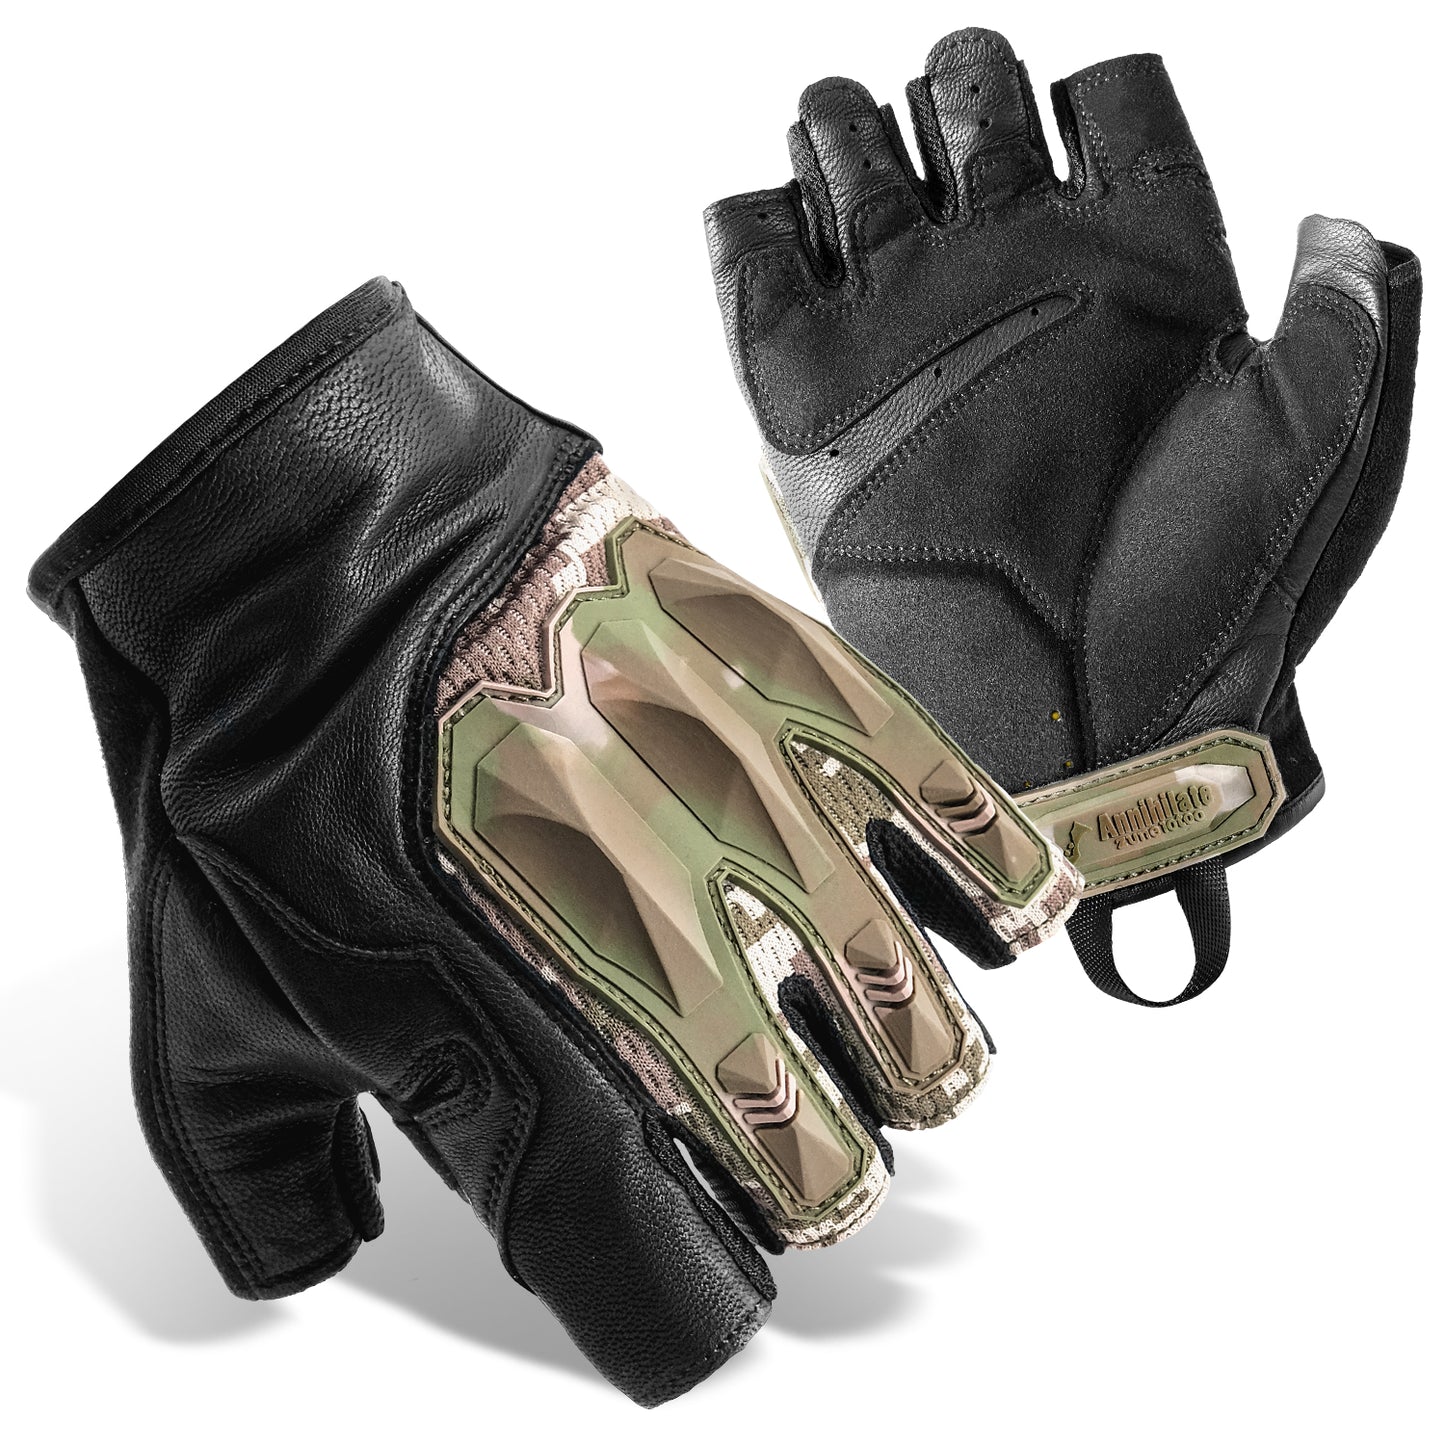 Tactical gloves ZG-003 100% accurate knuckle protection Half-finger